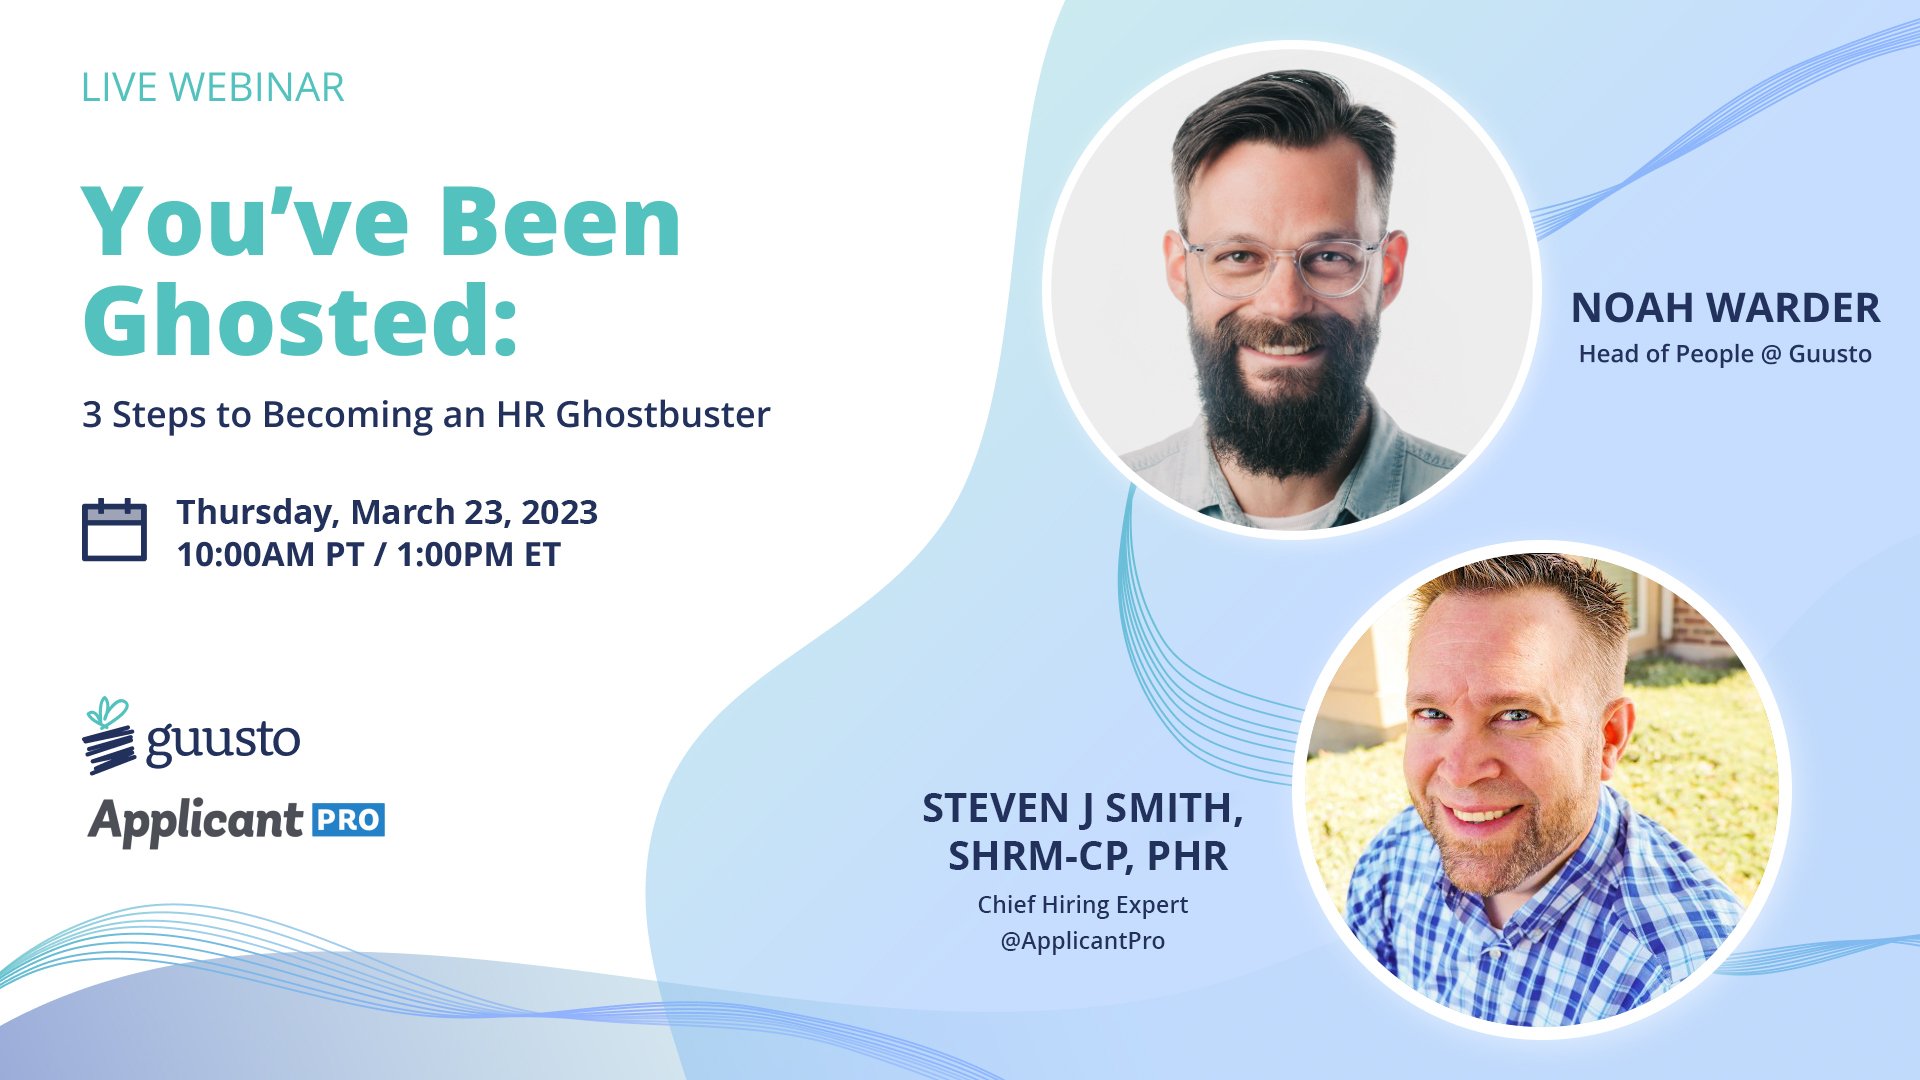 You’ve Been Ghosted: 3 Steps to Becoming an HR Ghostbuster